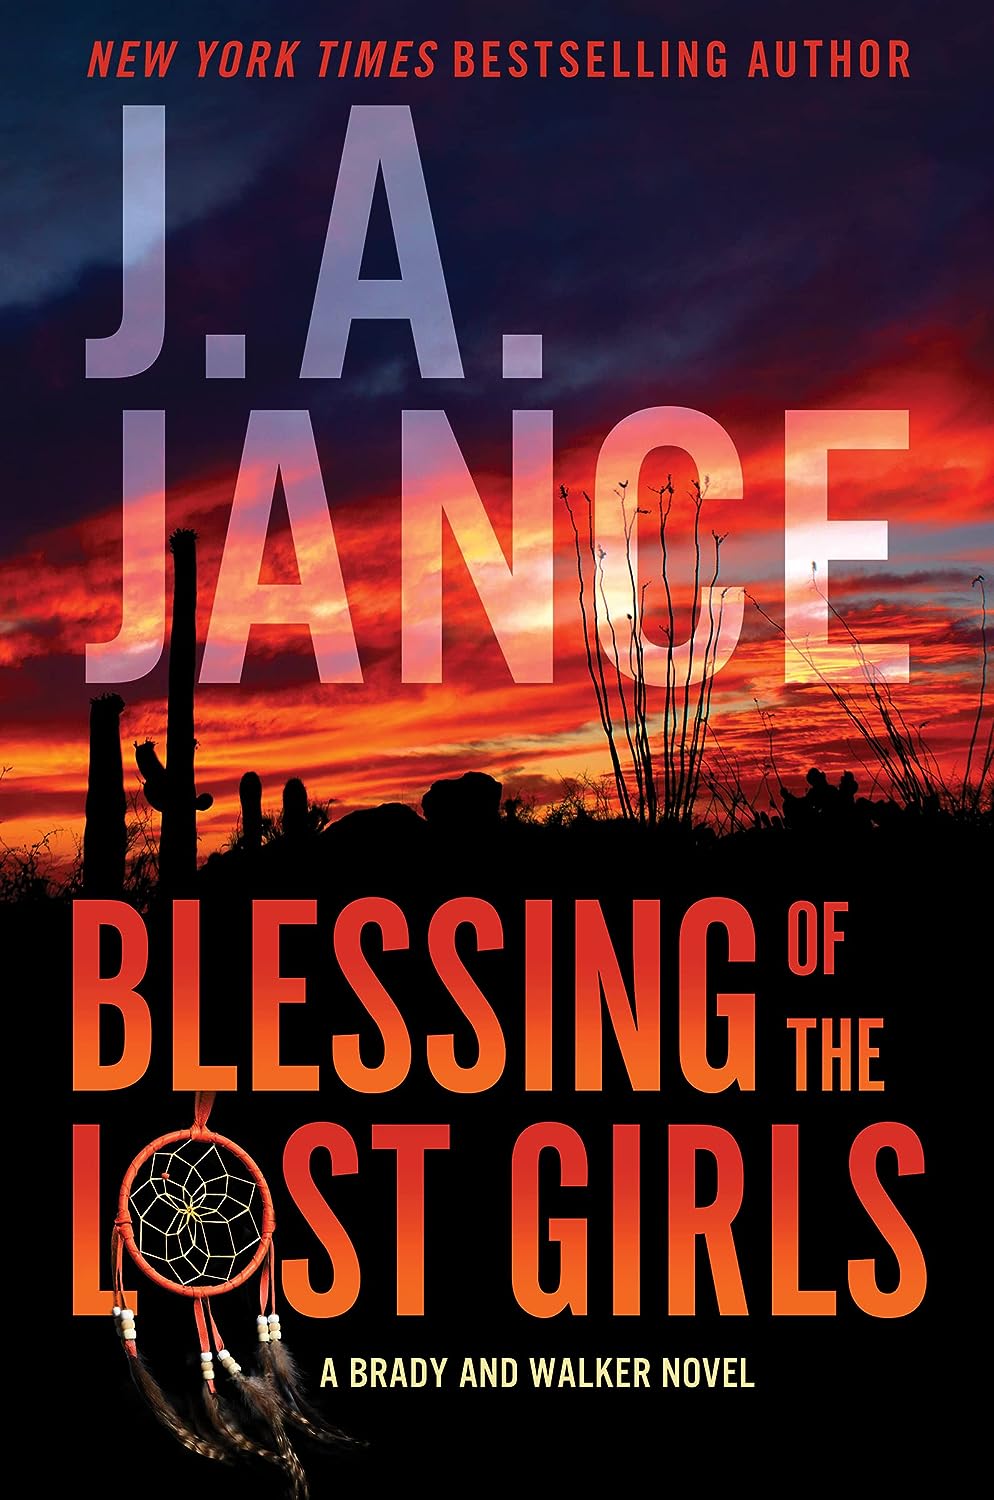 blessings-of-the-lost-girls-ja-jance